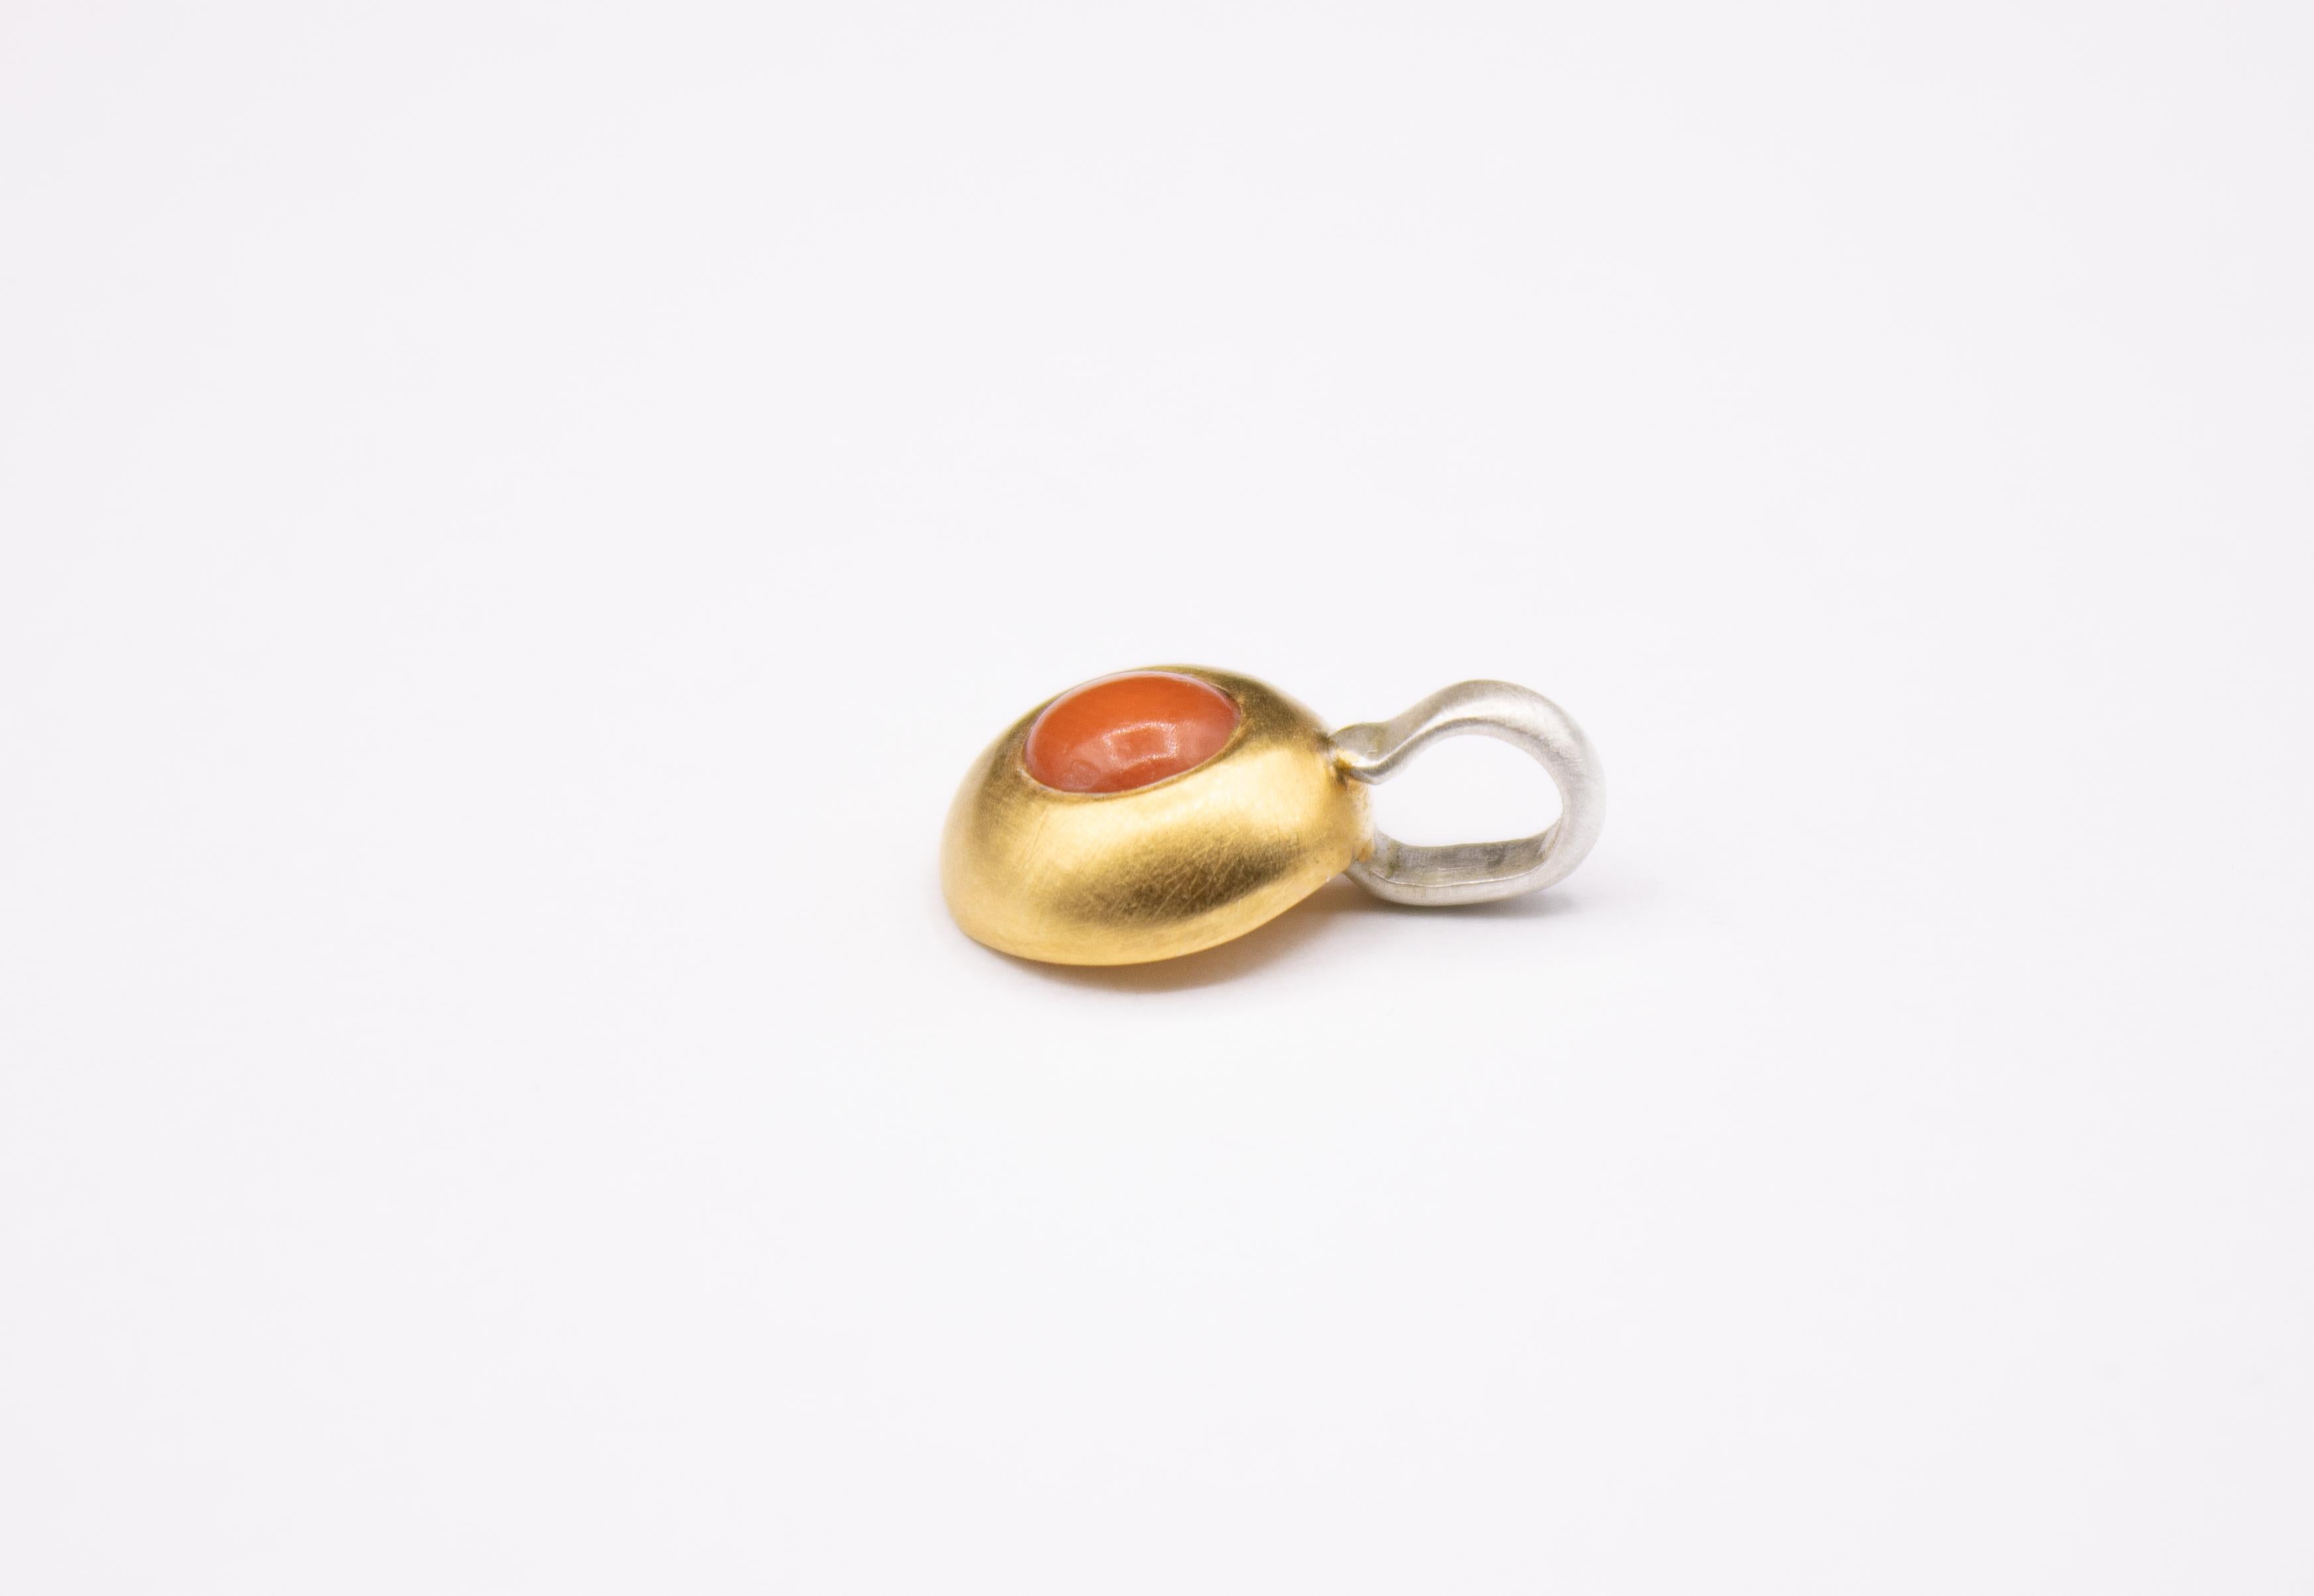 The gold plated Coral Pendant made from Sterling Silver is part of the Coral Collections and symbolizes the vibrant and high quality designs of Monika Herré.

 

The dynamic rail of the pendant is worked into the matt gold plated frame with